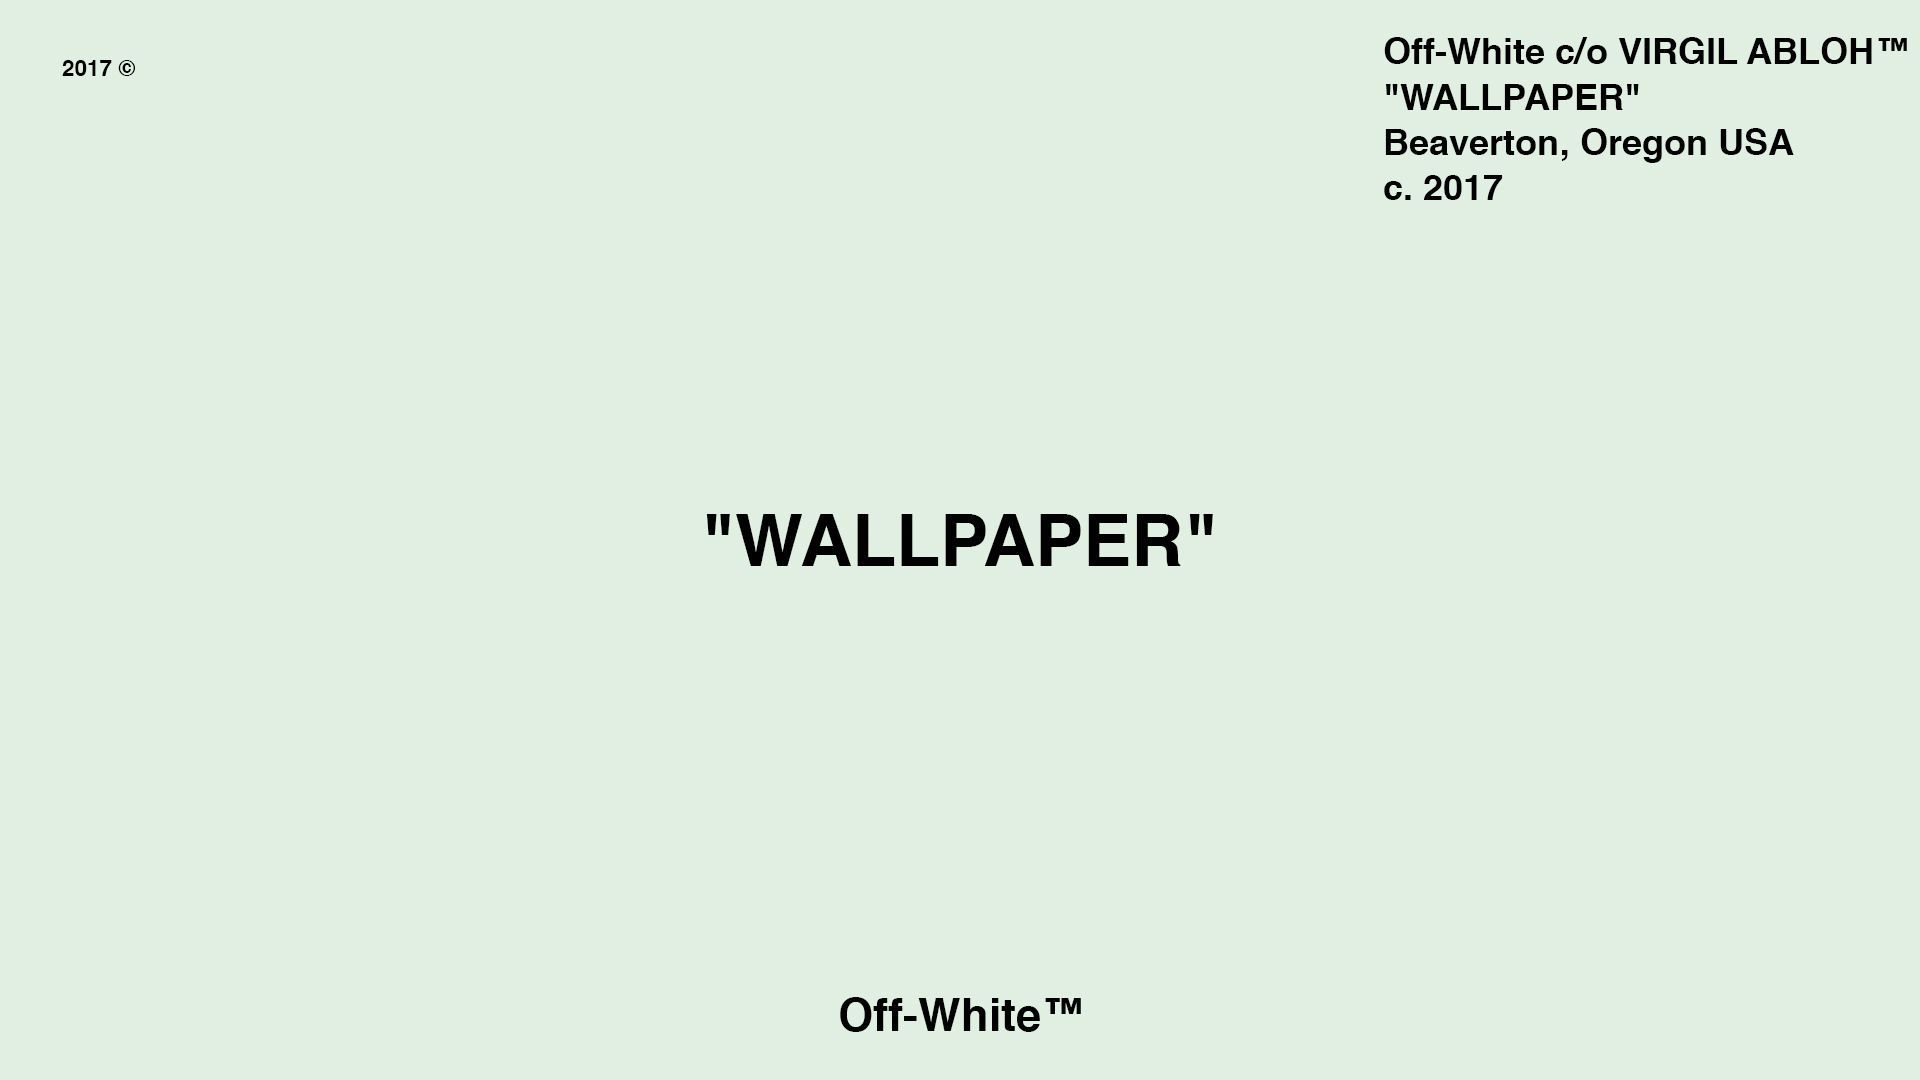 A page from Off-White c/o Virgil Abloh's 2017 WALLPAPER. - Off-White